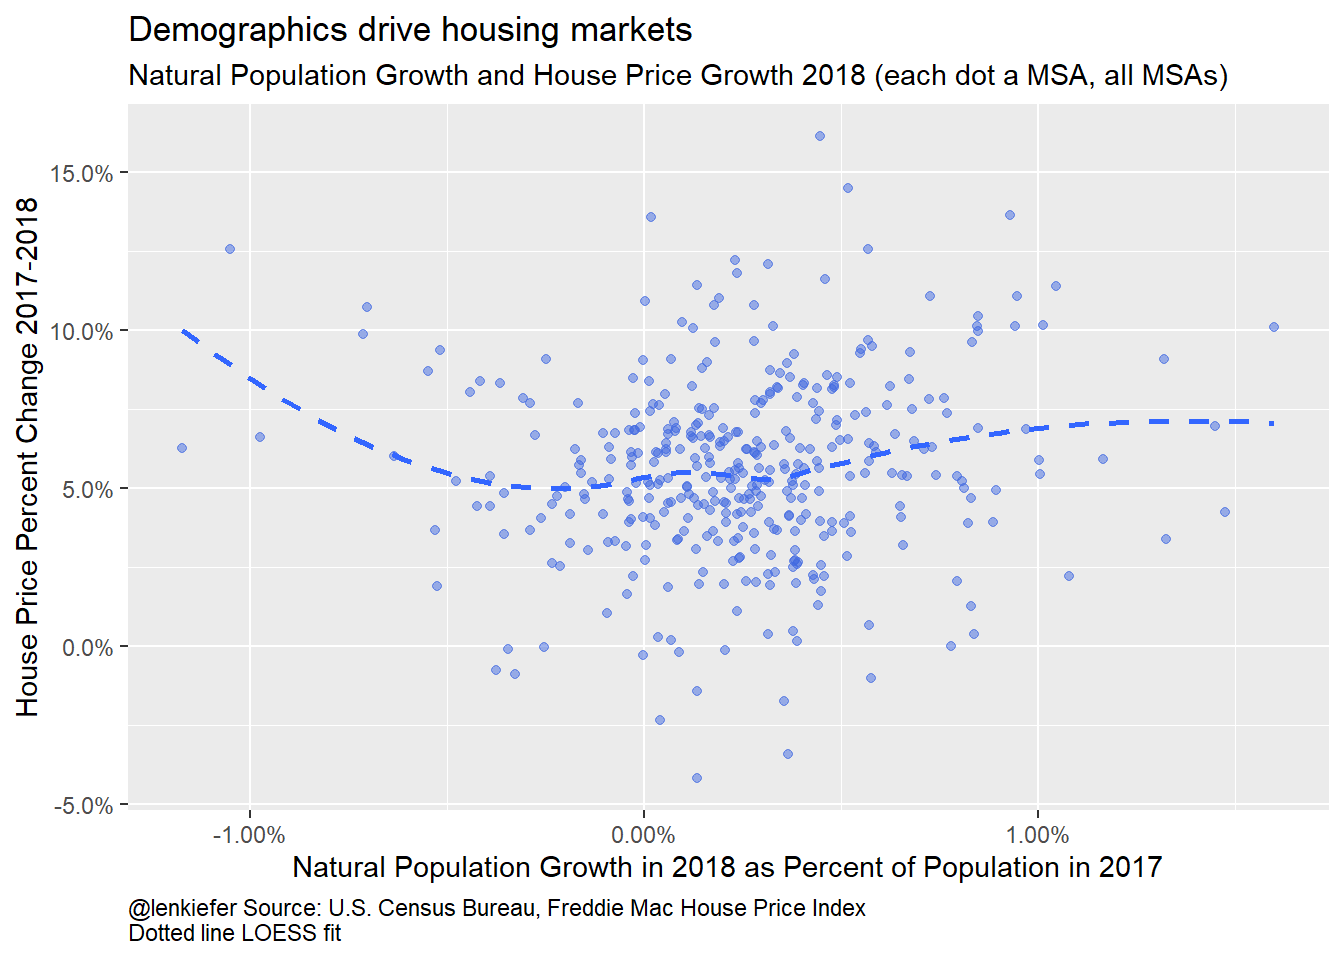 Natural Population Growth and House Price Growth 2018